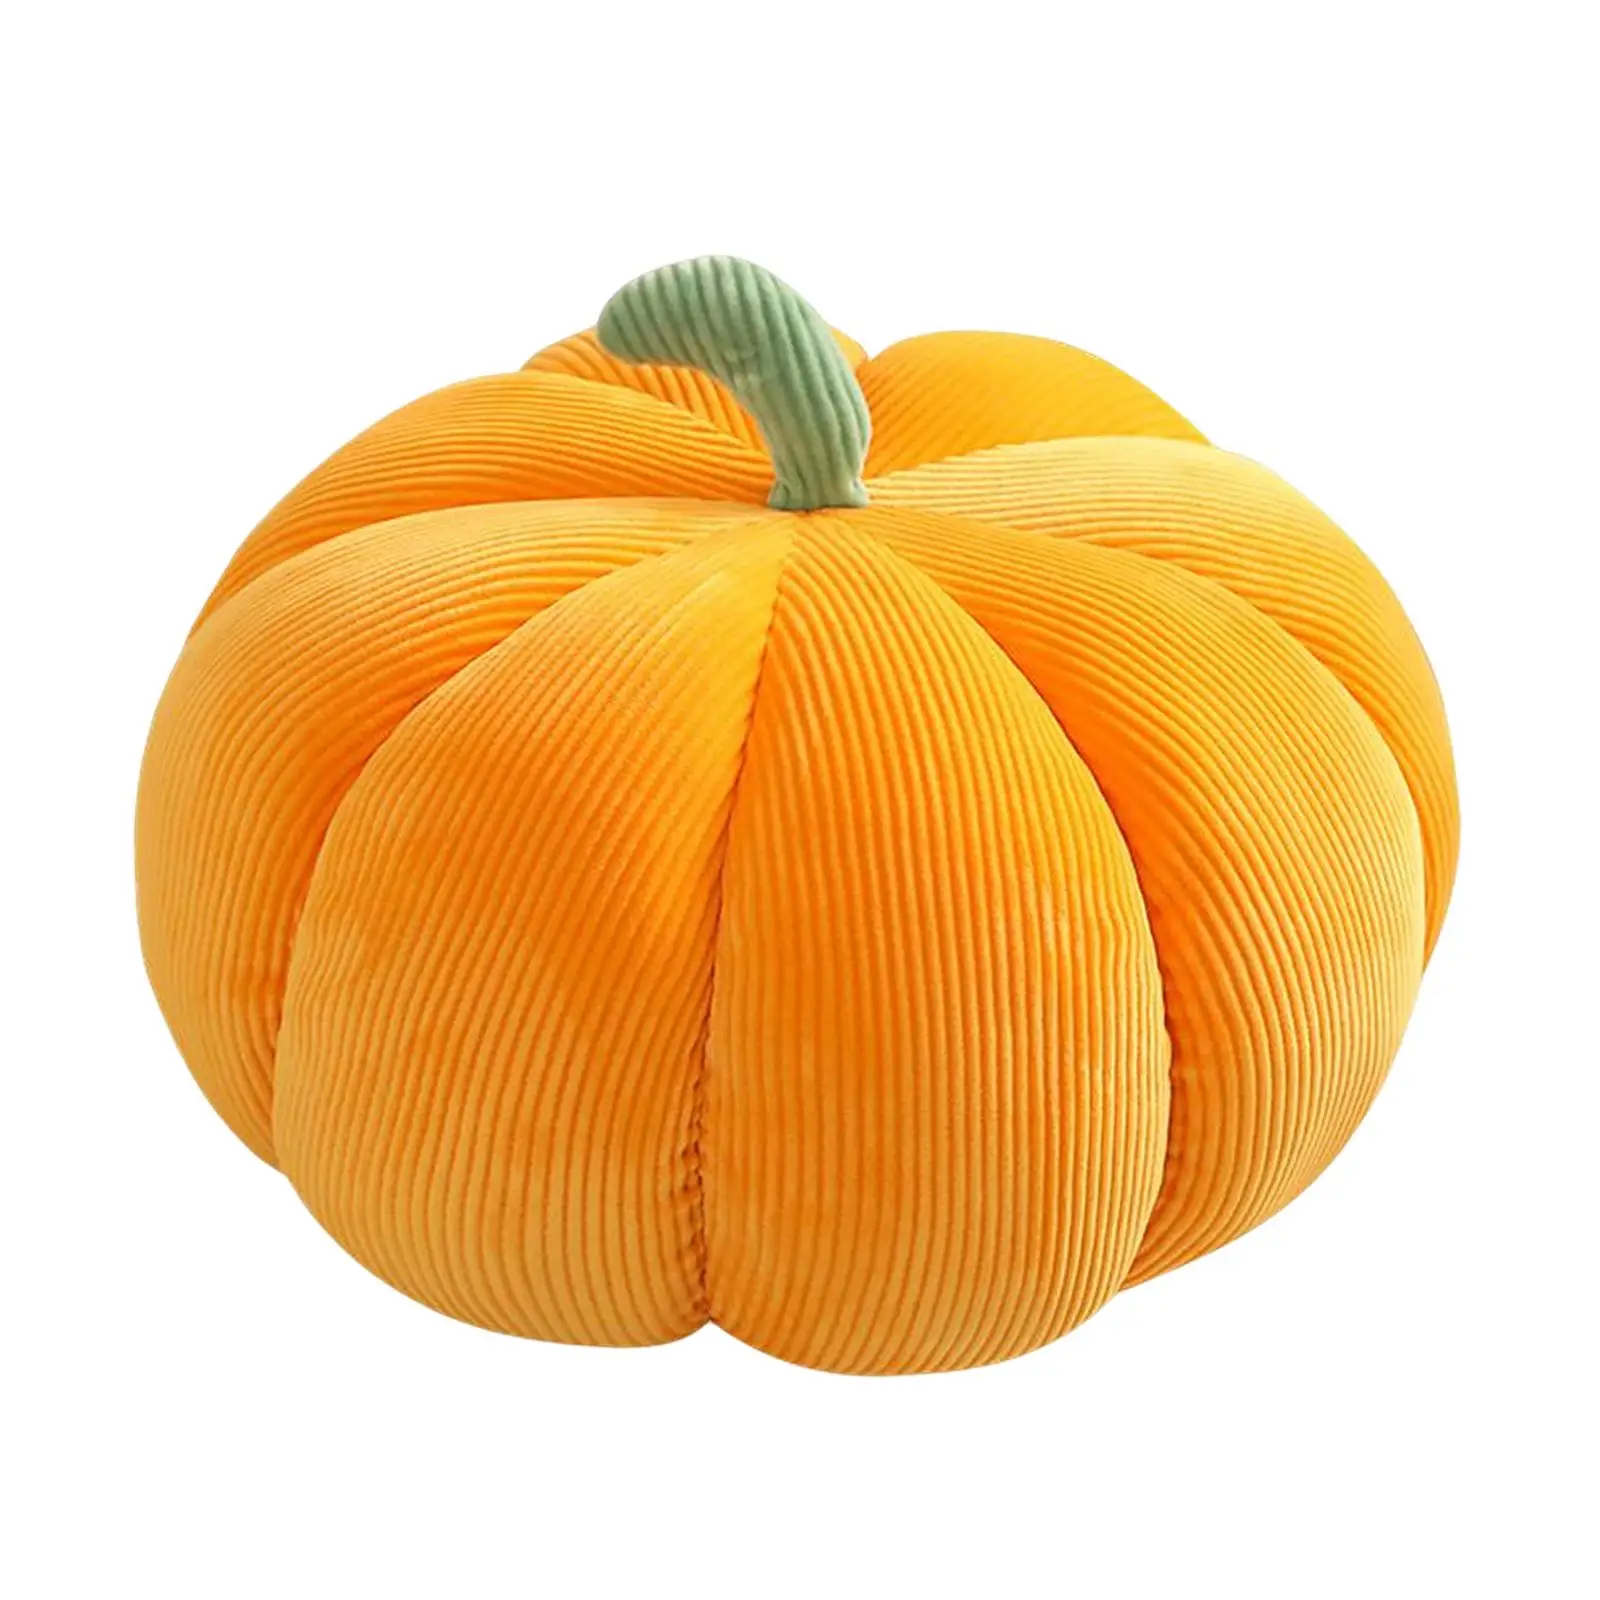 Plush Stuffed Pumpkin Throw Pillow Autumn Decoration Couch Throw Pillow Toy for Home Decor Bedroom Halloween